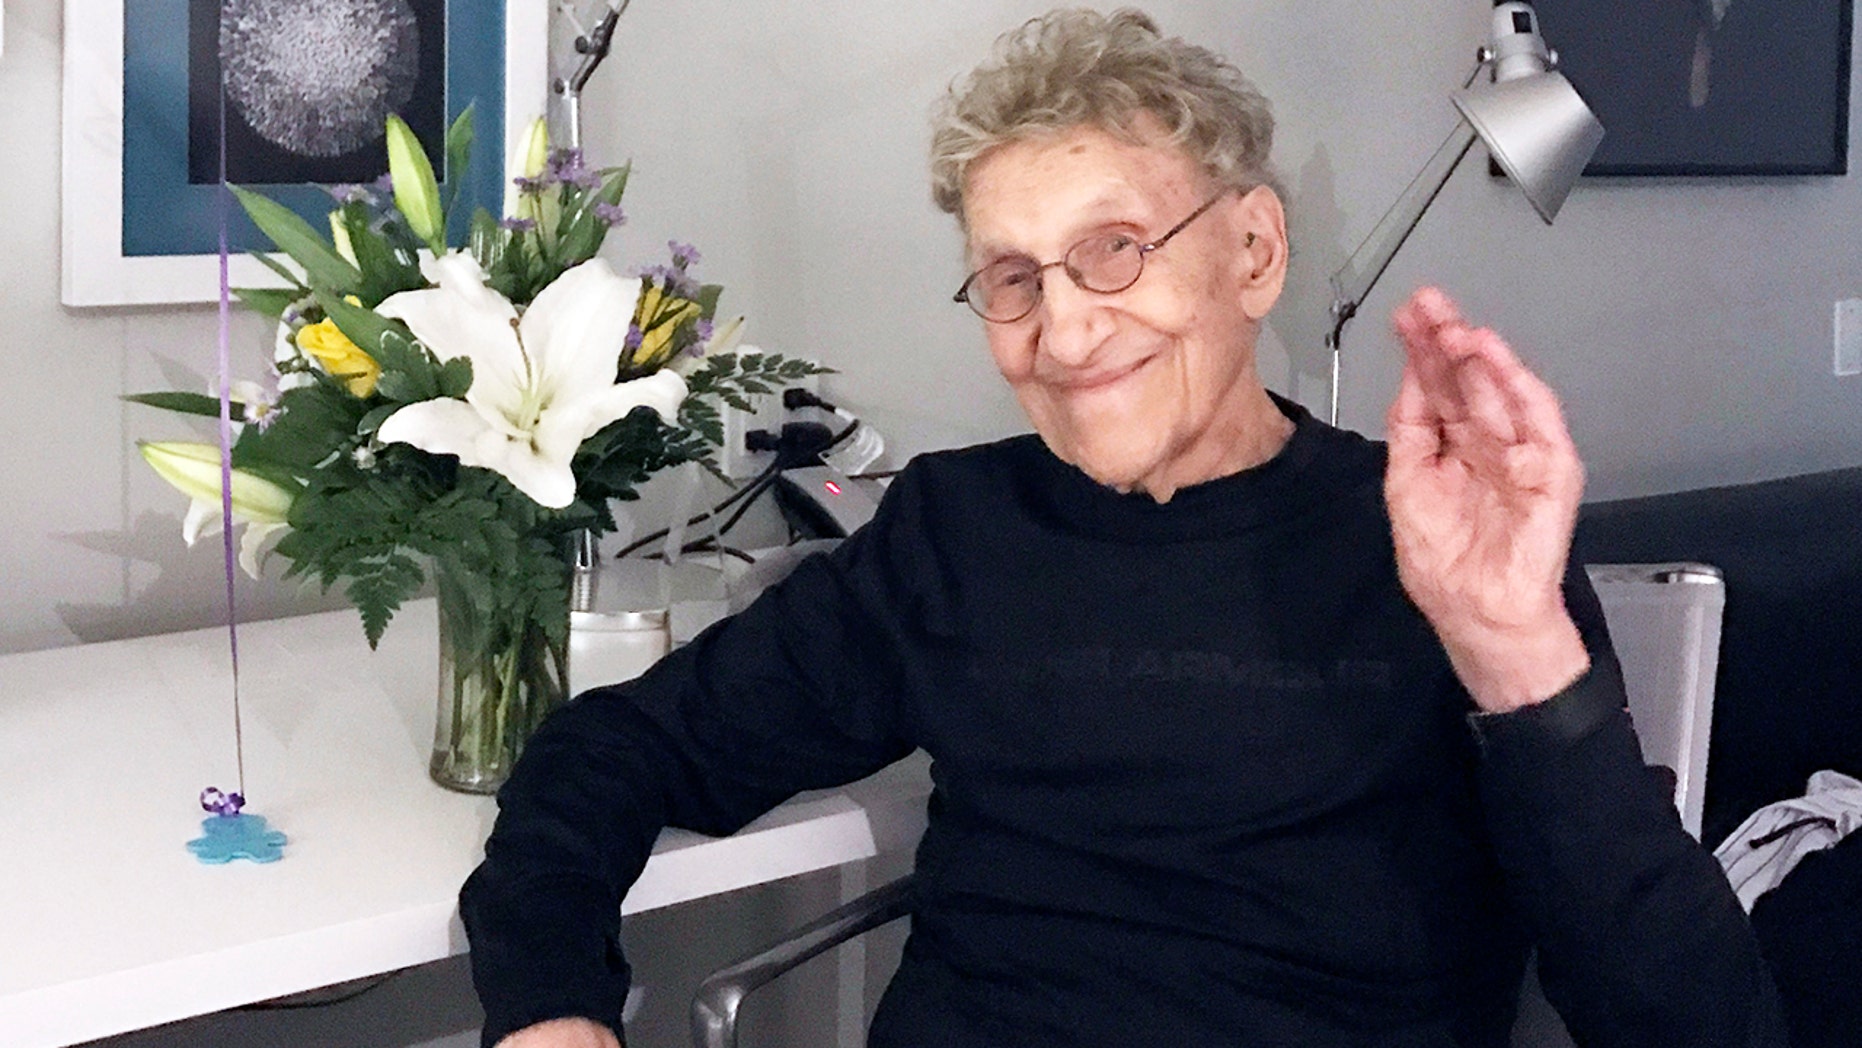 This February 7, 2017 photo provided by Suzanne Shore shows her husband, Sammy Shore. The actor and comedian who co-founded the Comedy Store died Saturday, May 18, 2019. He was 92 years old.